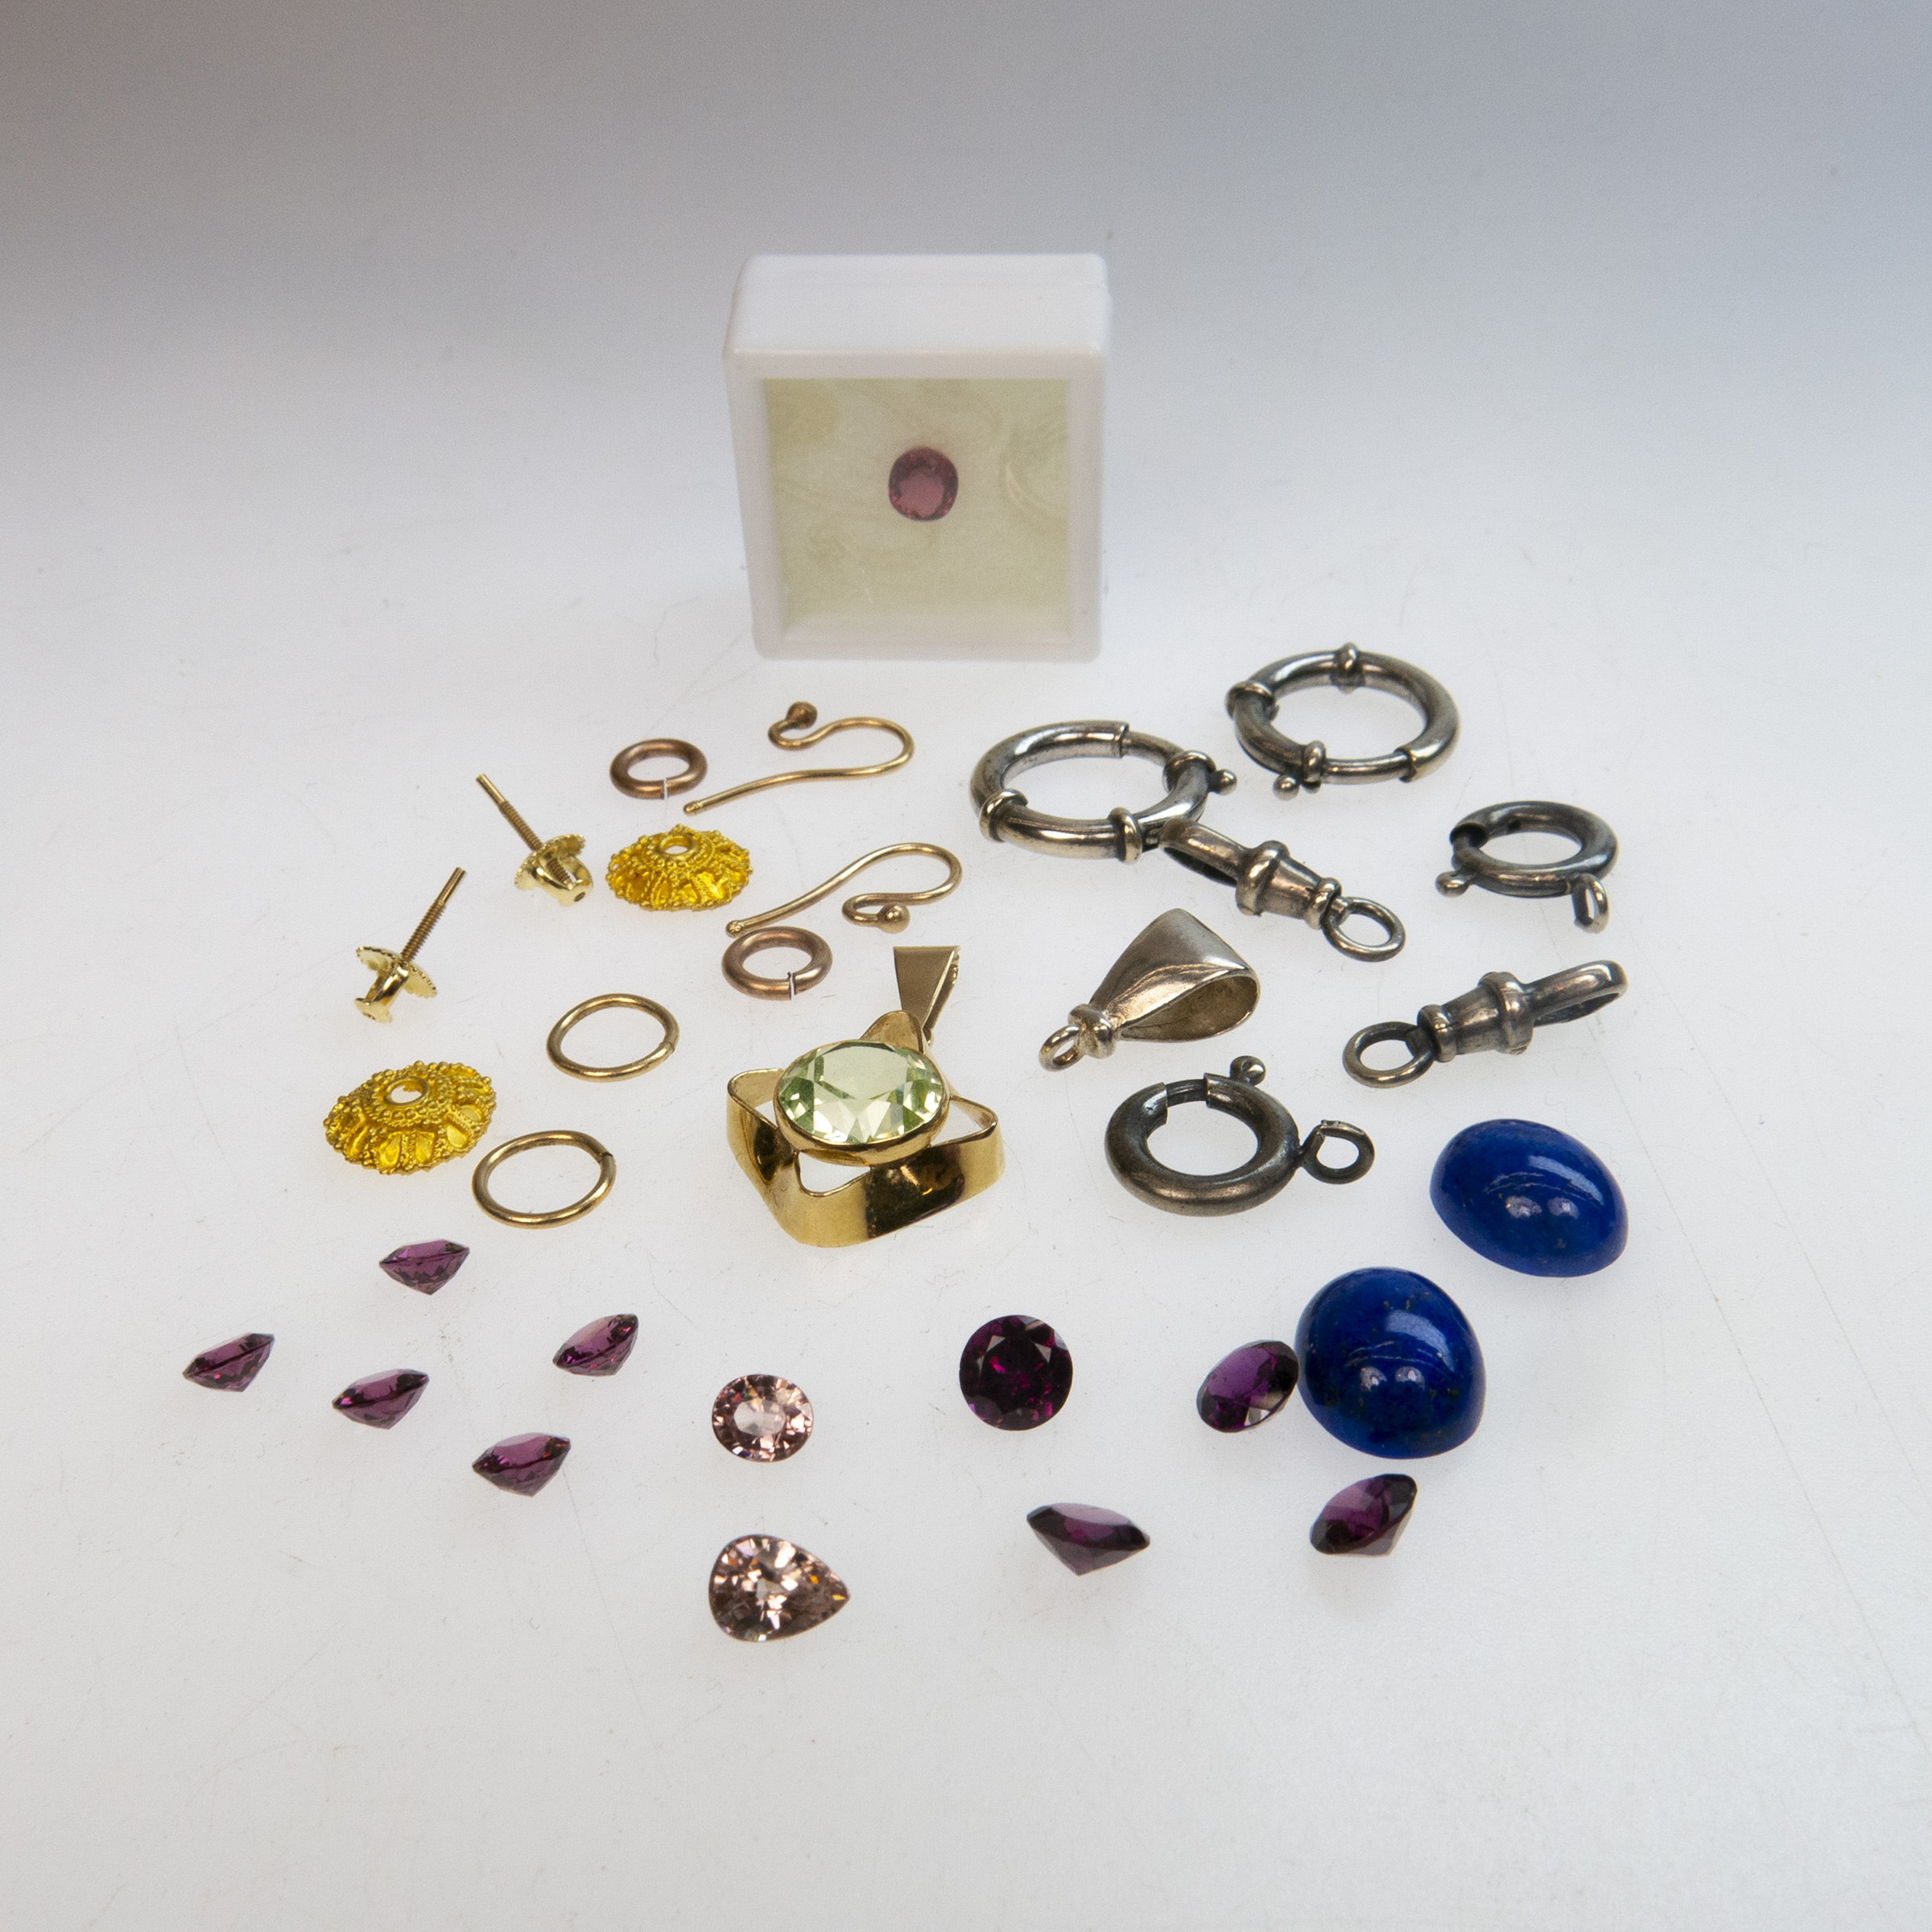 Quantity Of Gold, Silver, and Loose Gemstones